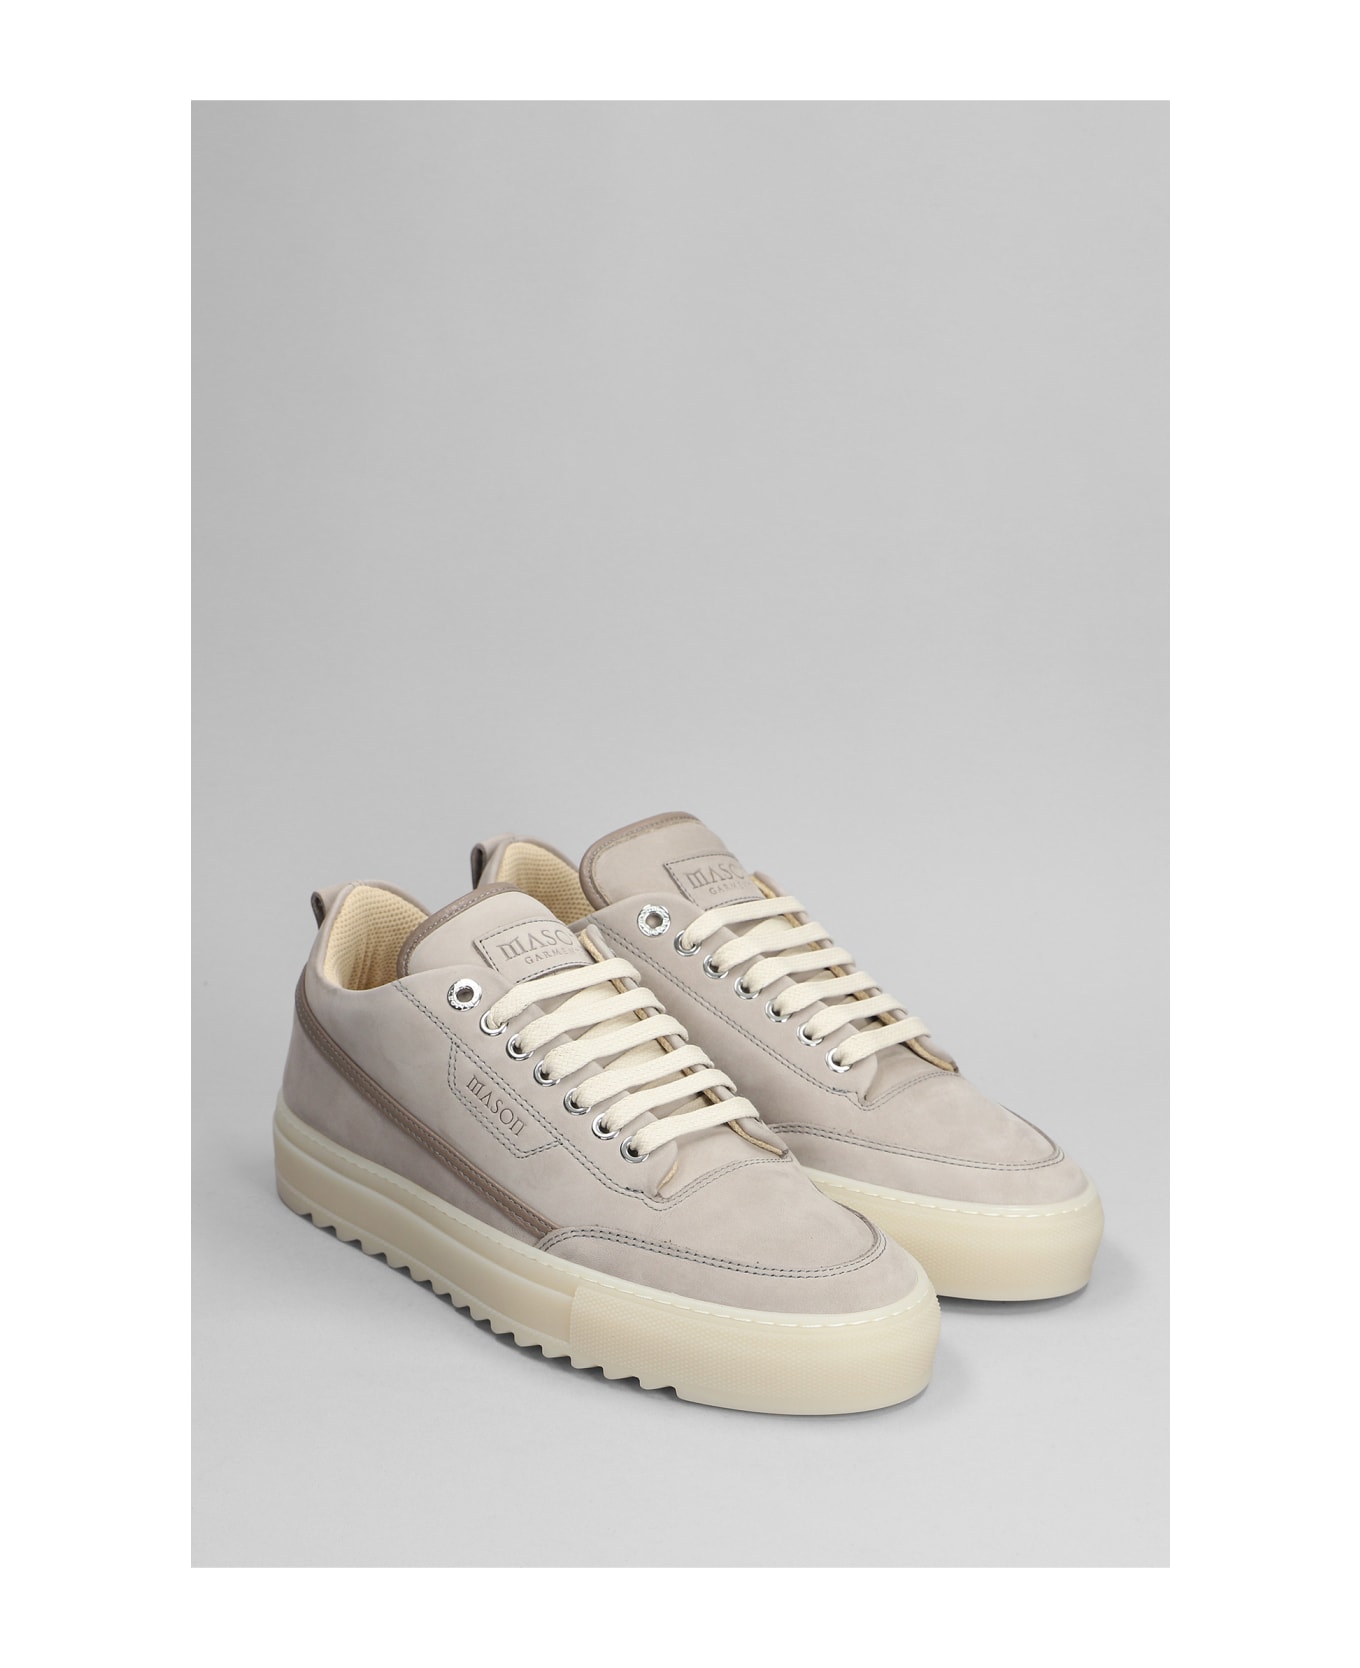 Mason Garments Torino Sneakers In Taupe Leather - taupe